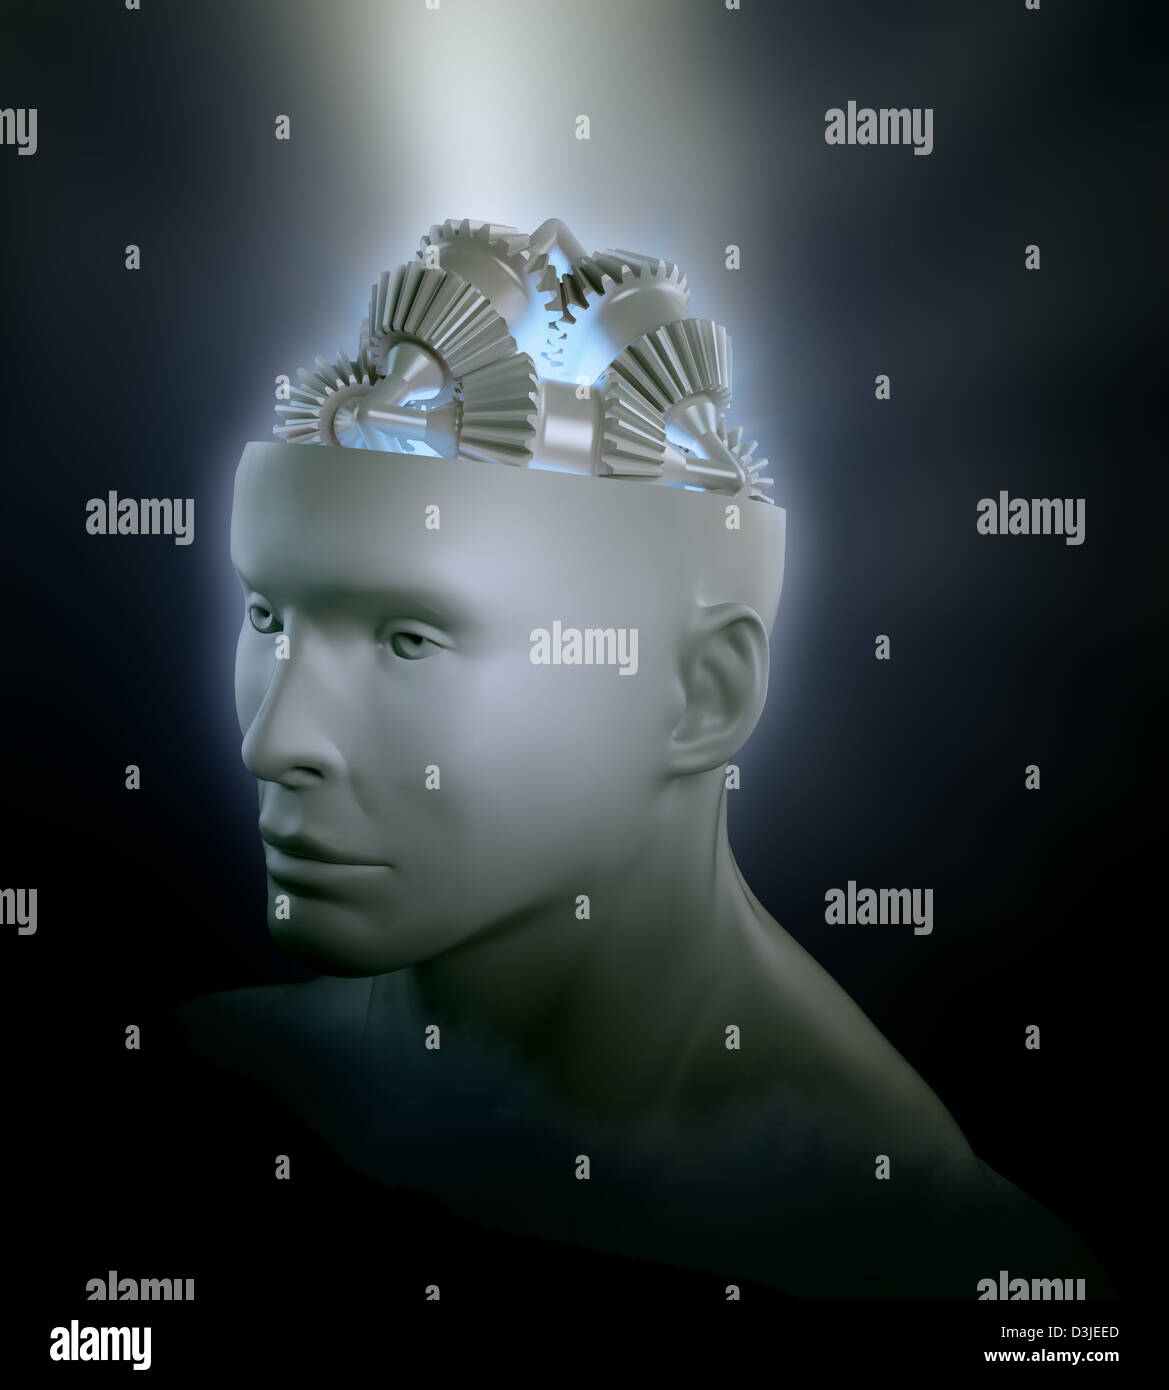 Cog wheels and gear inside a head shape -psychology and creativity concept illustration Stock Photo